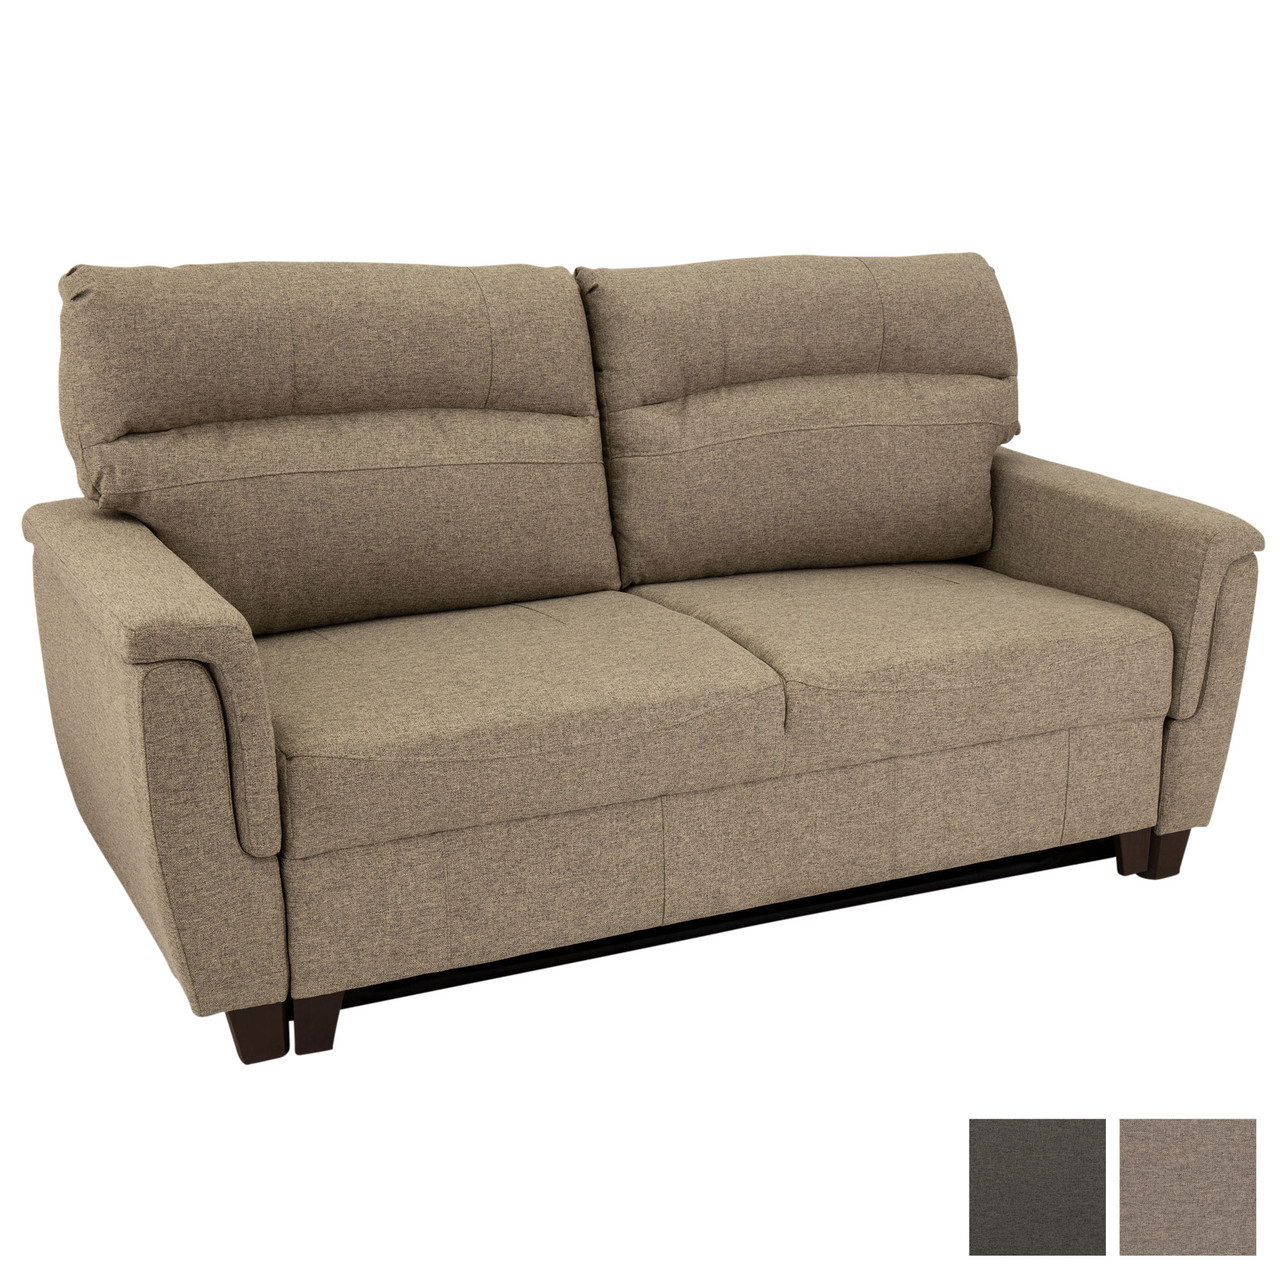 RecPro Michael 68" EZ-OUT™ RV Trifold Sleeper Sofa in Cloth - RecPro